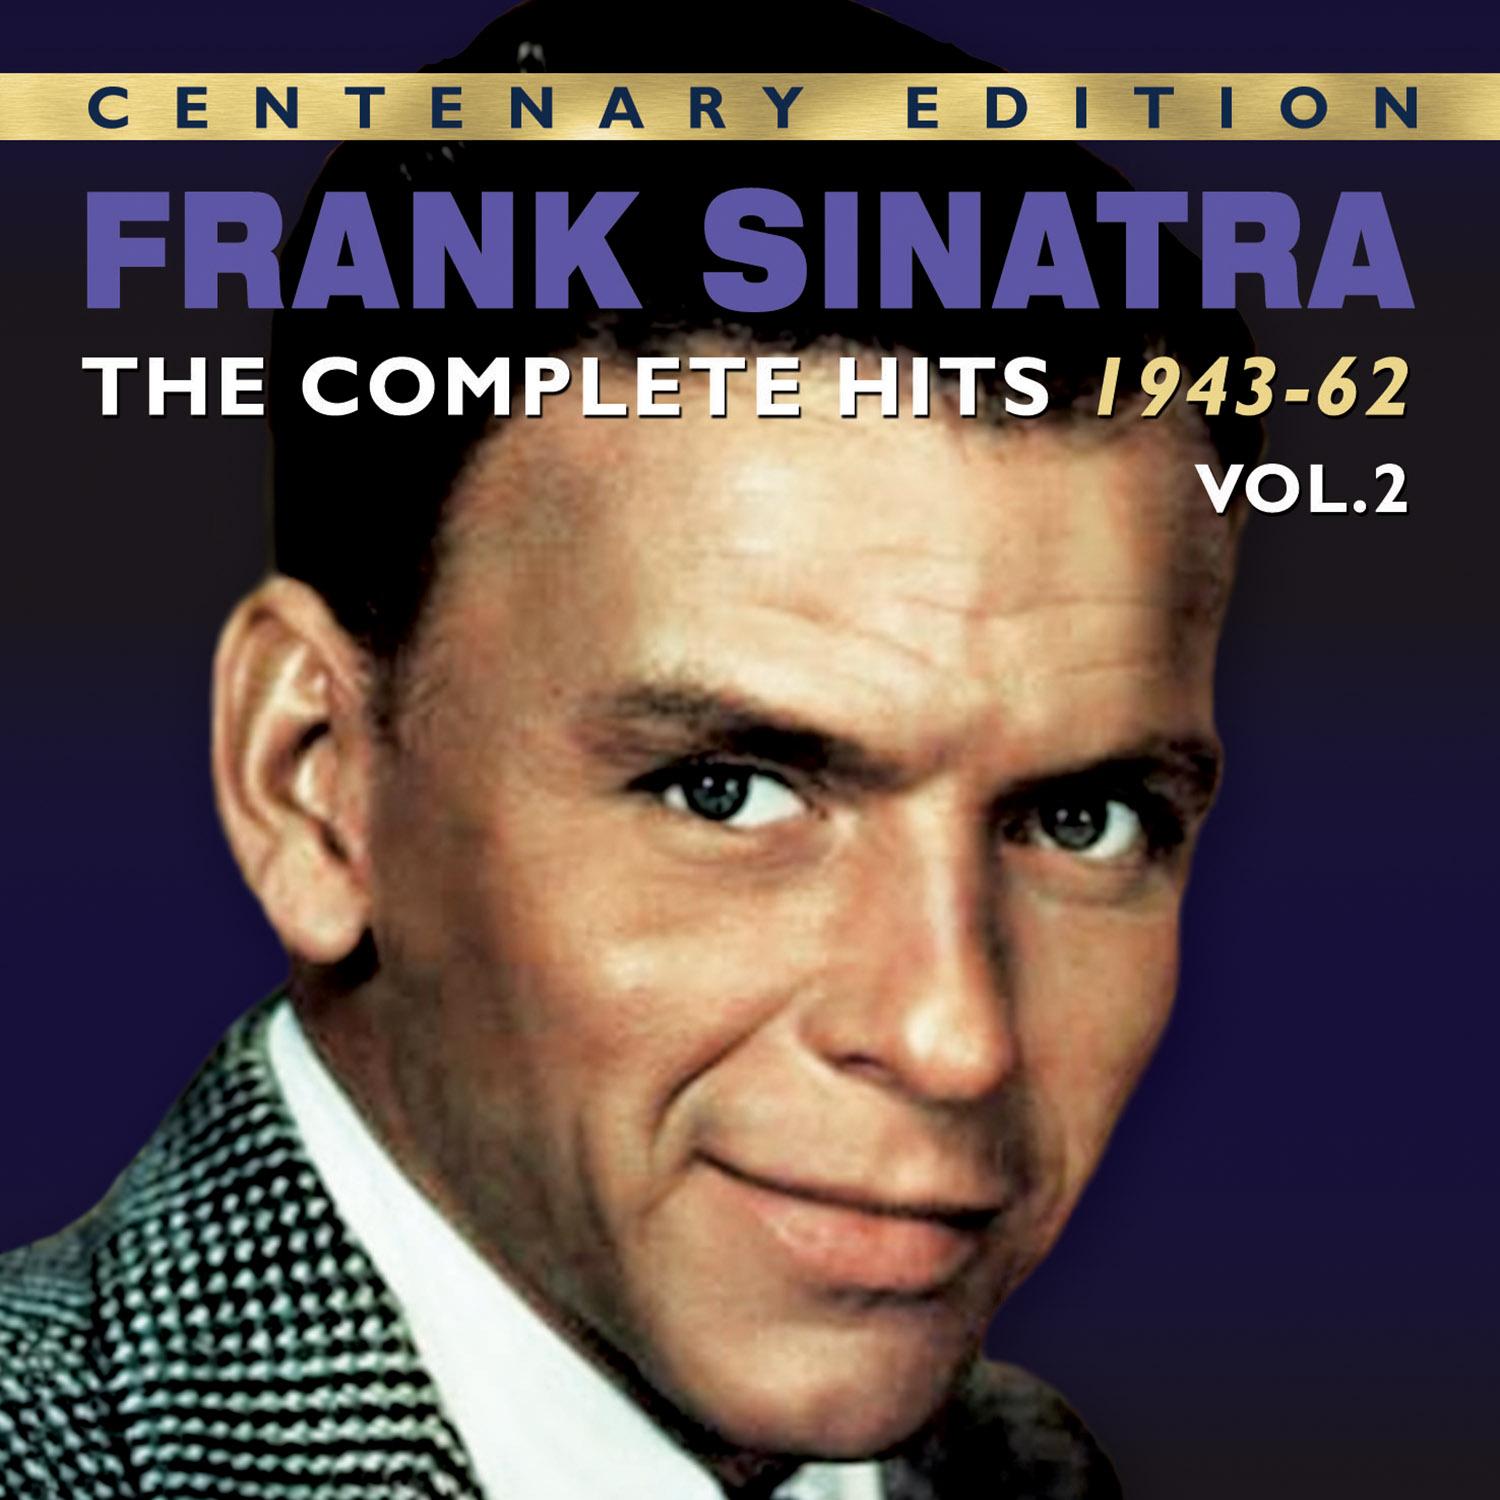 The Complete Hits 1943-62, Vol. 2